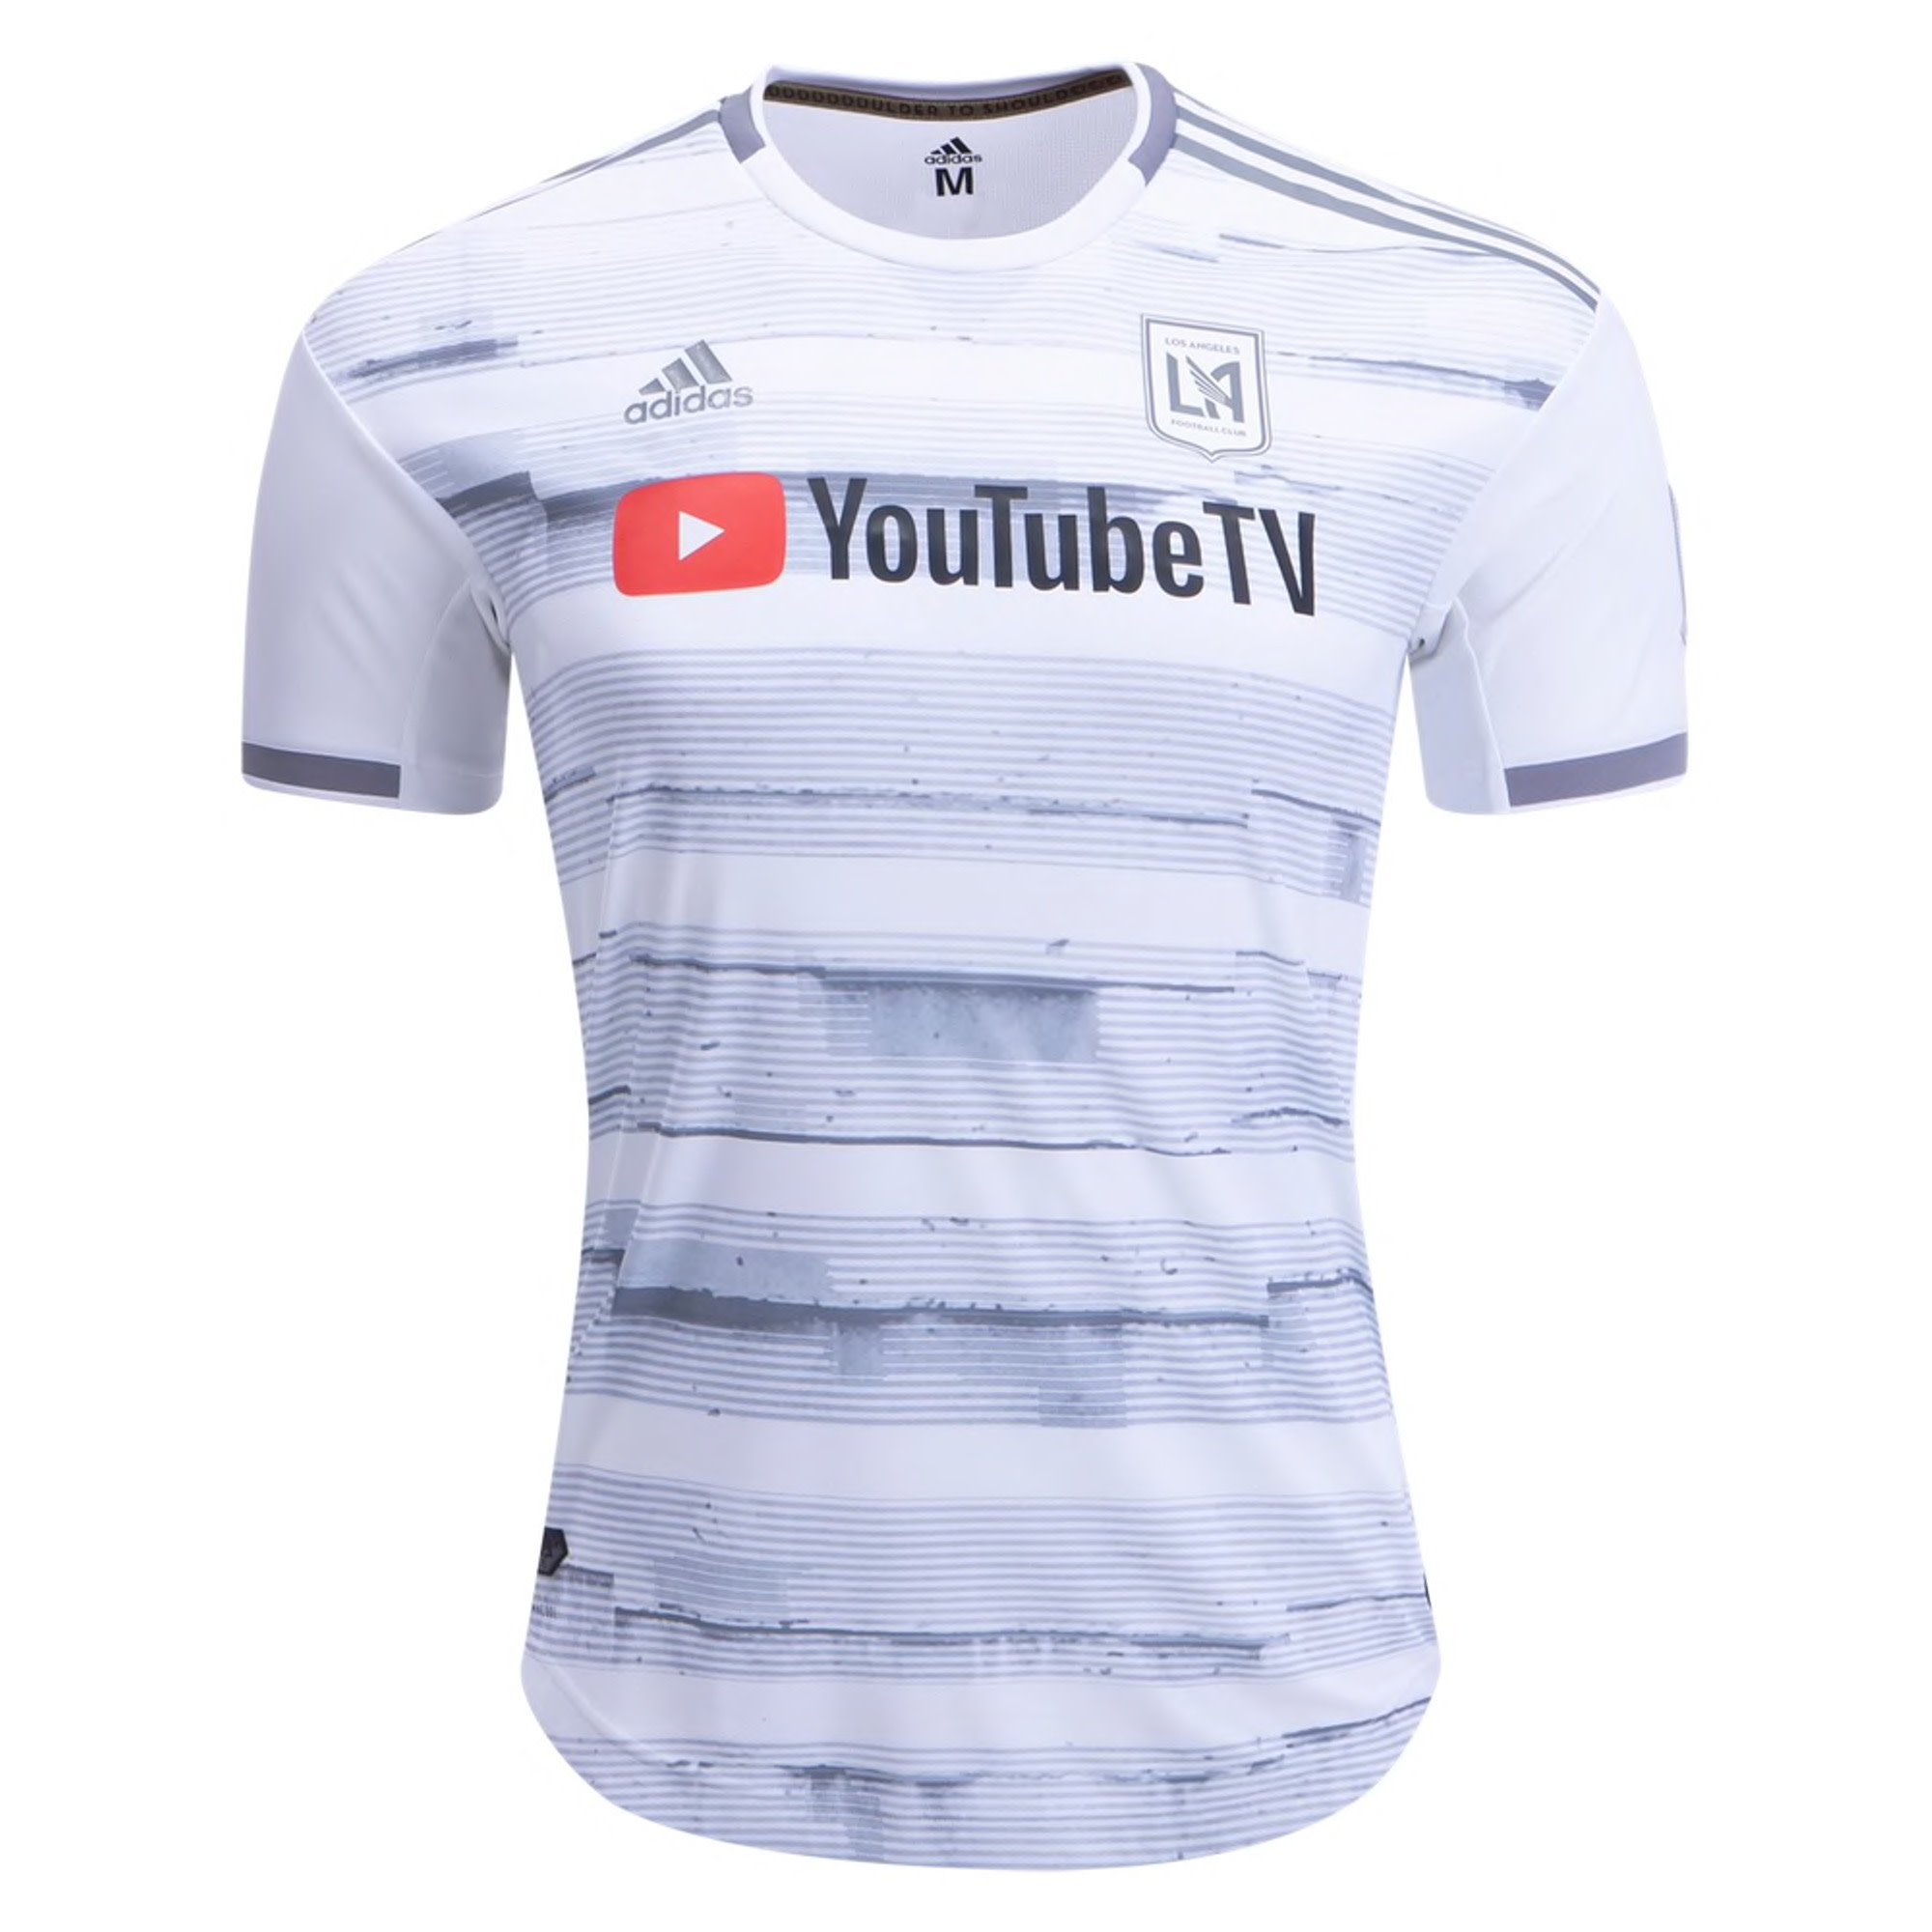 LAFC Adidas 20 Youth Replica Jersey Black - The Locker Room of Downey